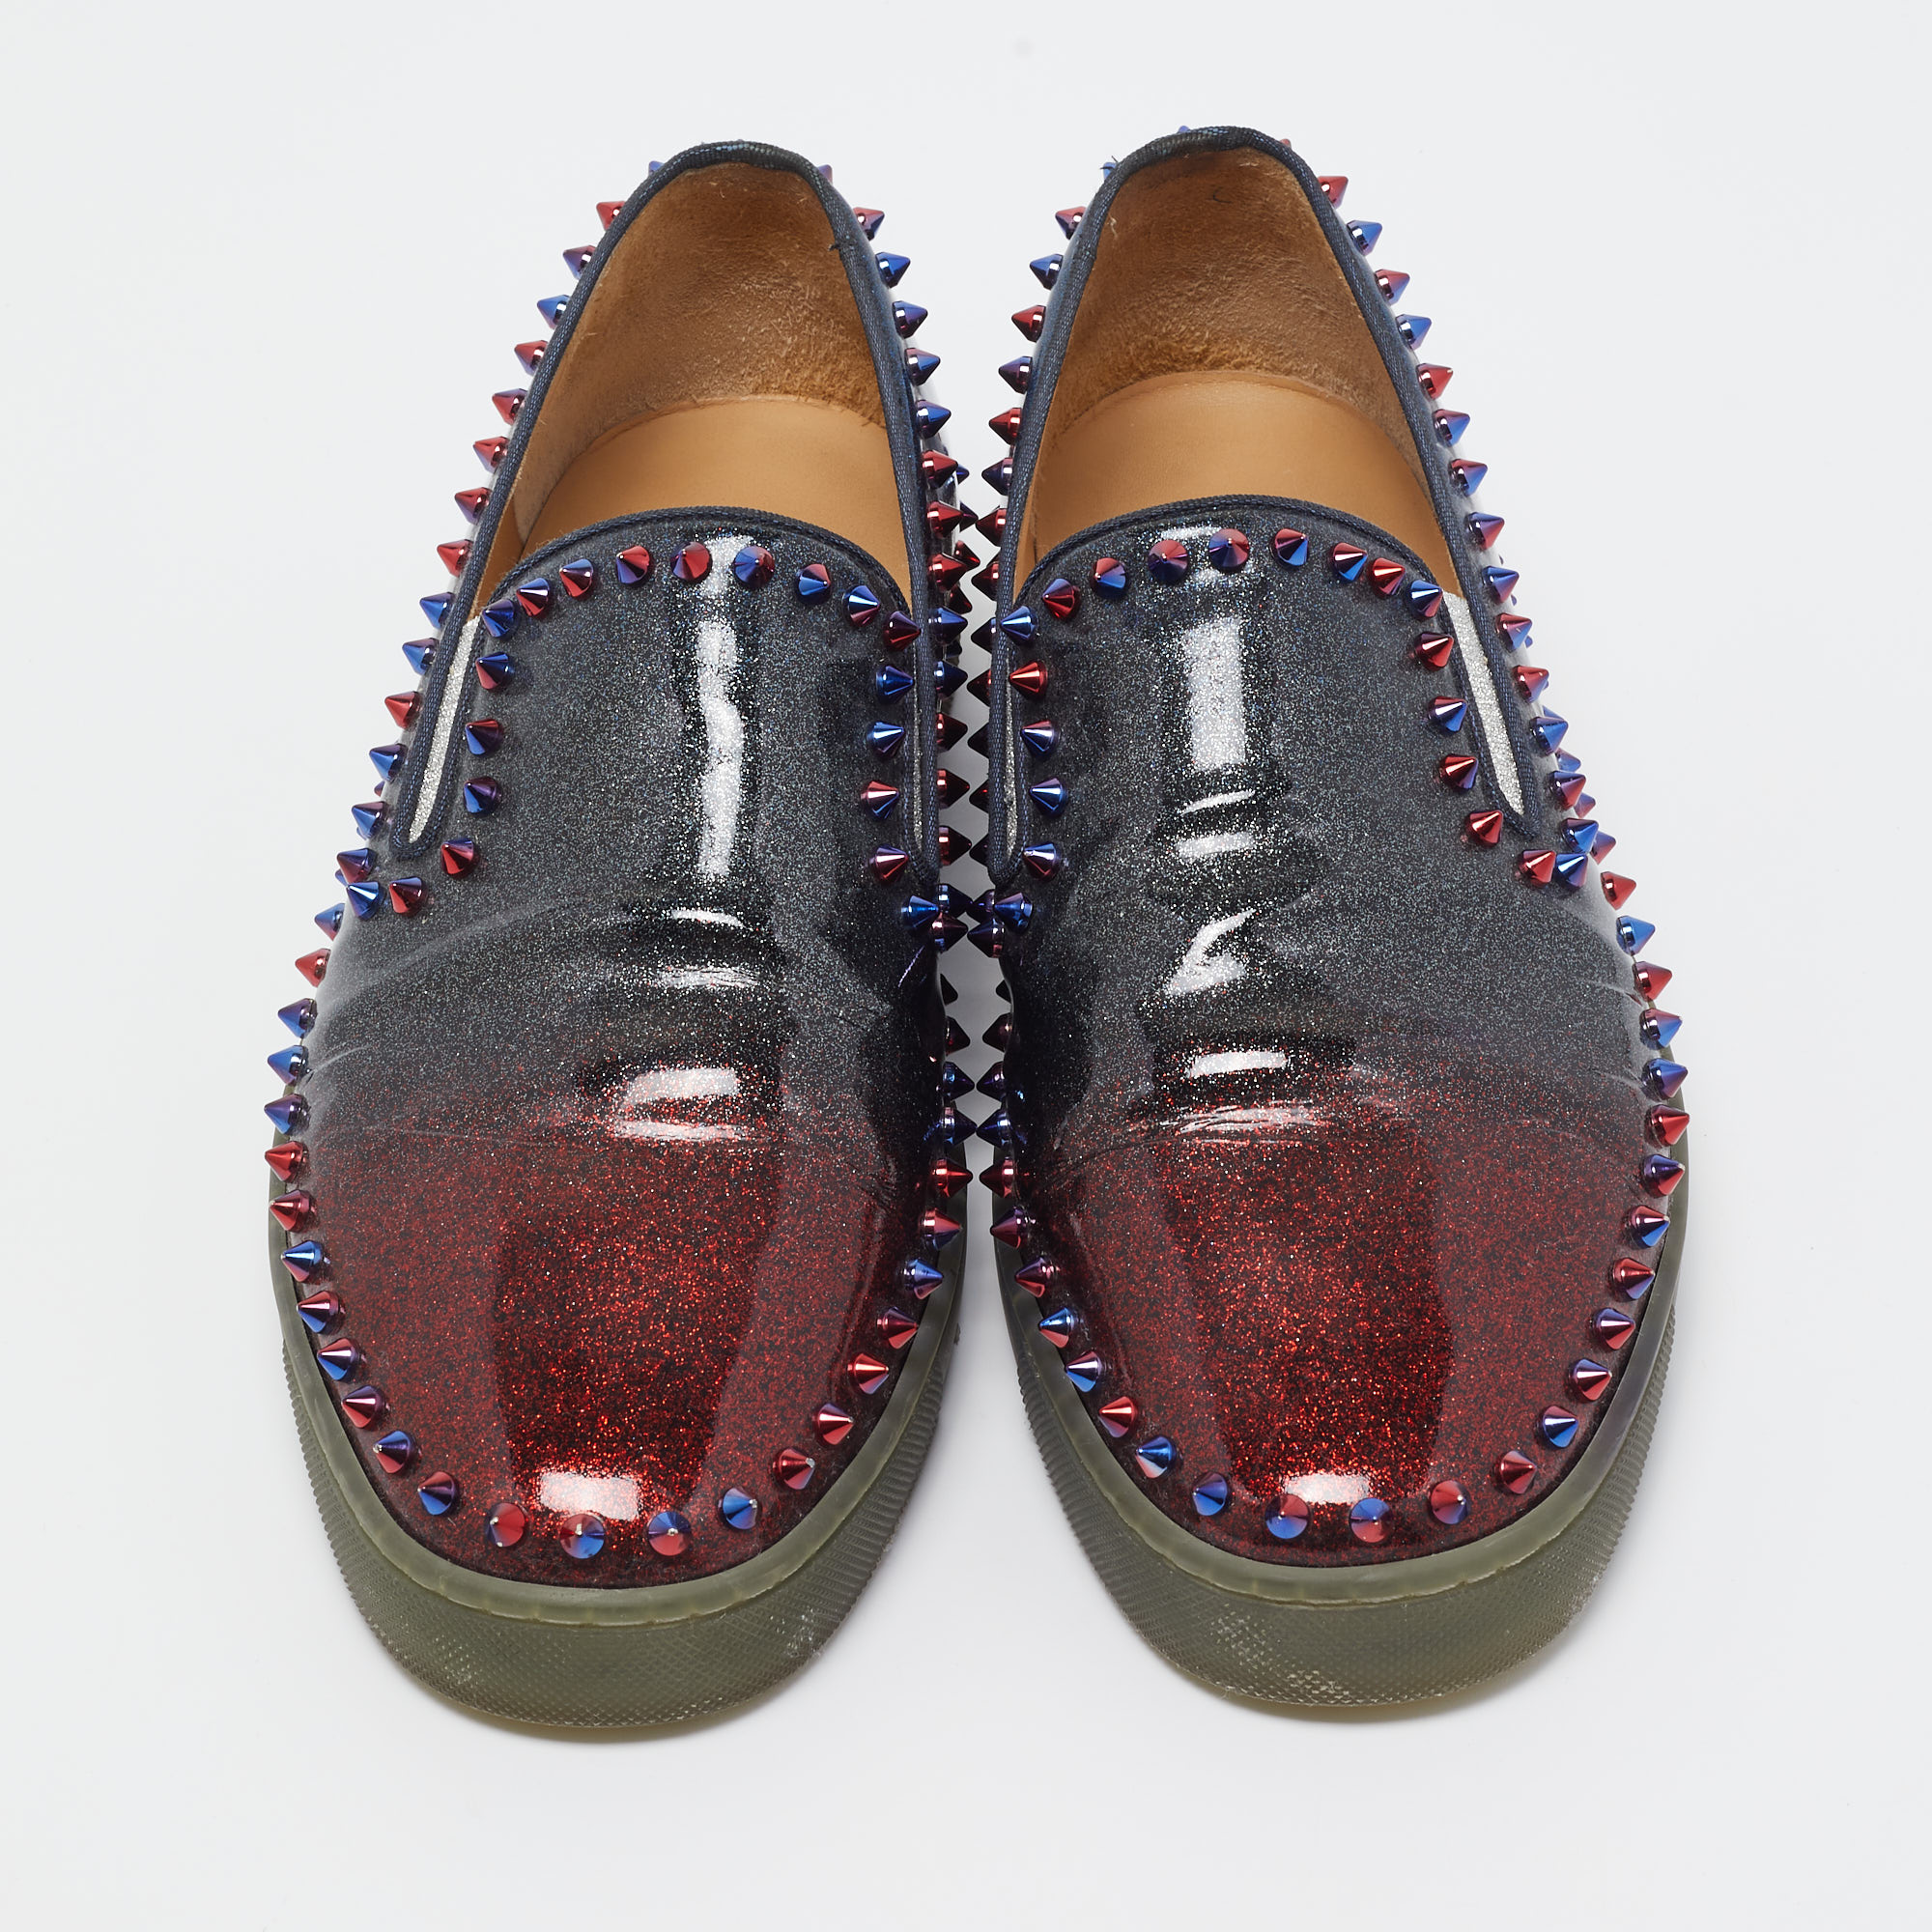 Christian Louboutin Multicolor Glitter Patent Leather Spike Pik Boat Slip On Sneakers Size 42.5